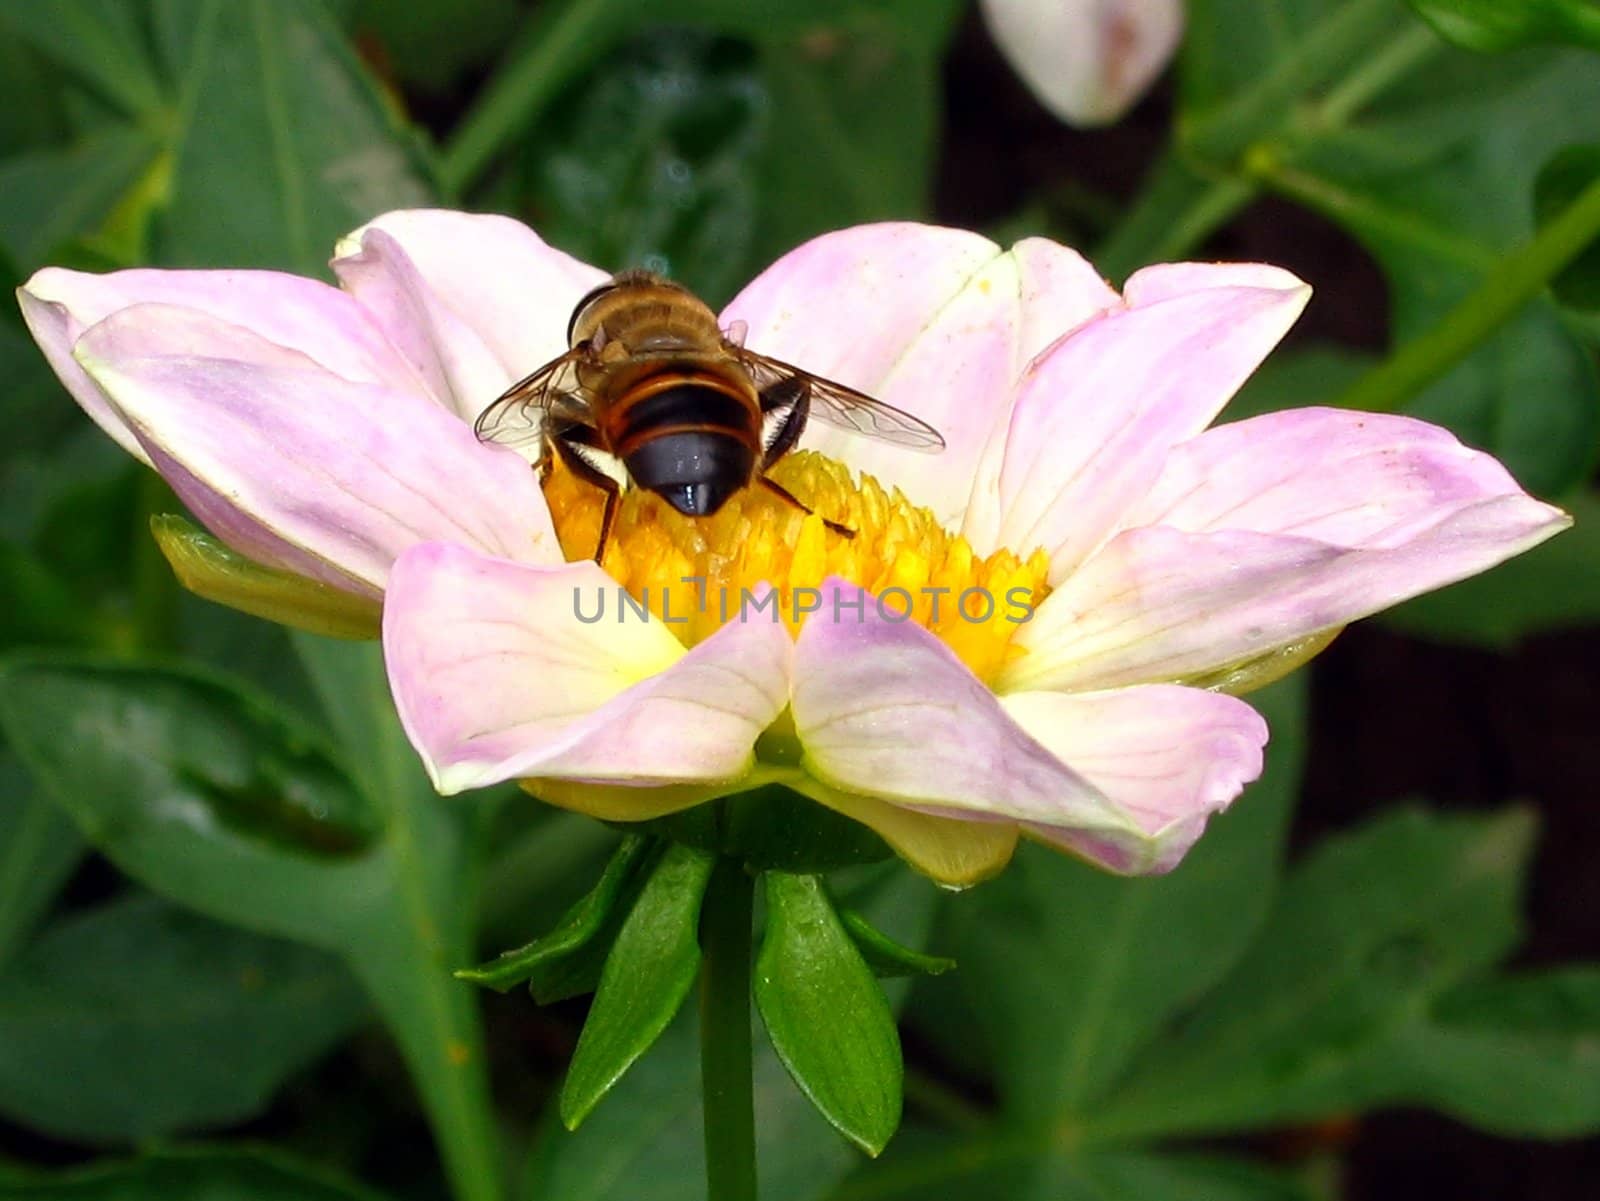 The hover-fly on a flower.